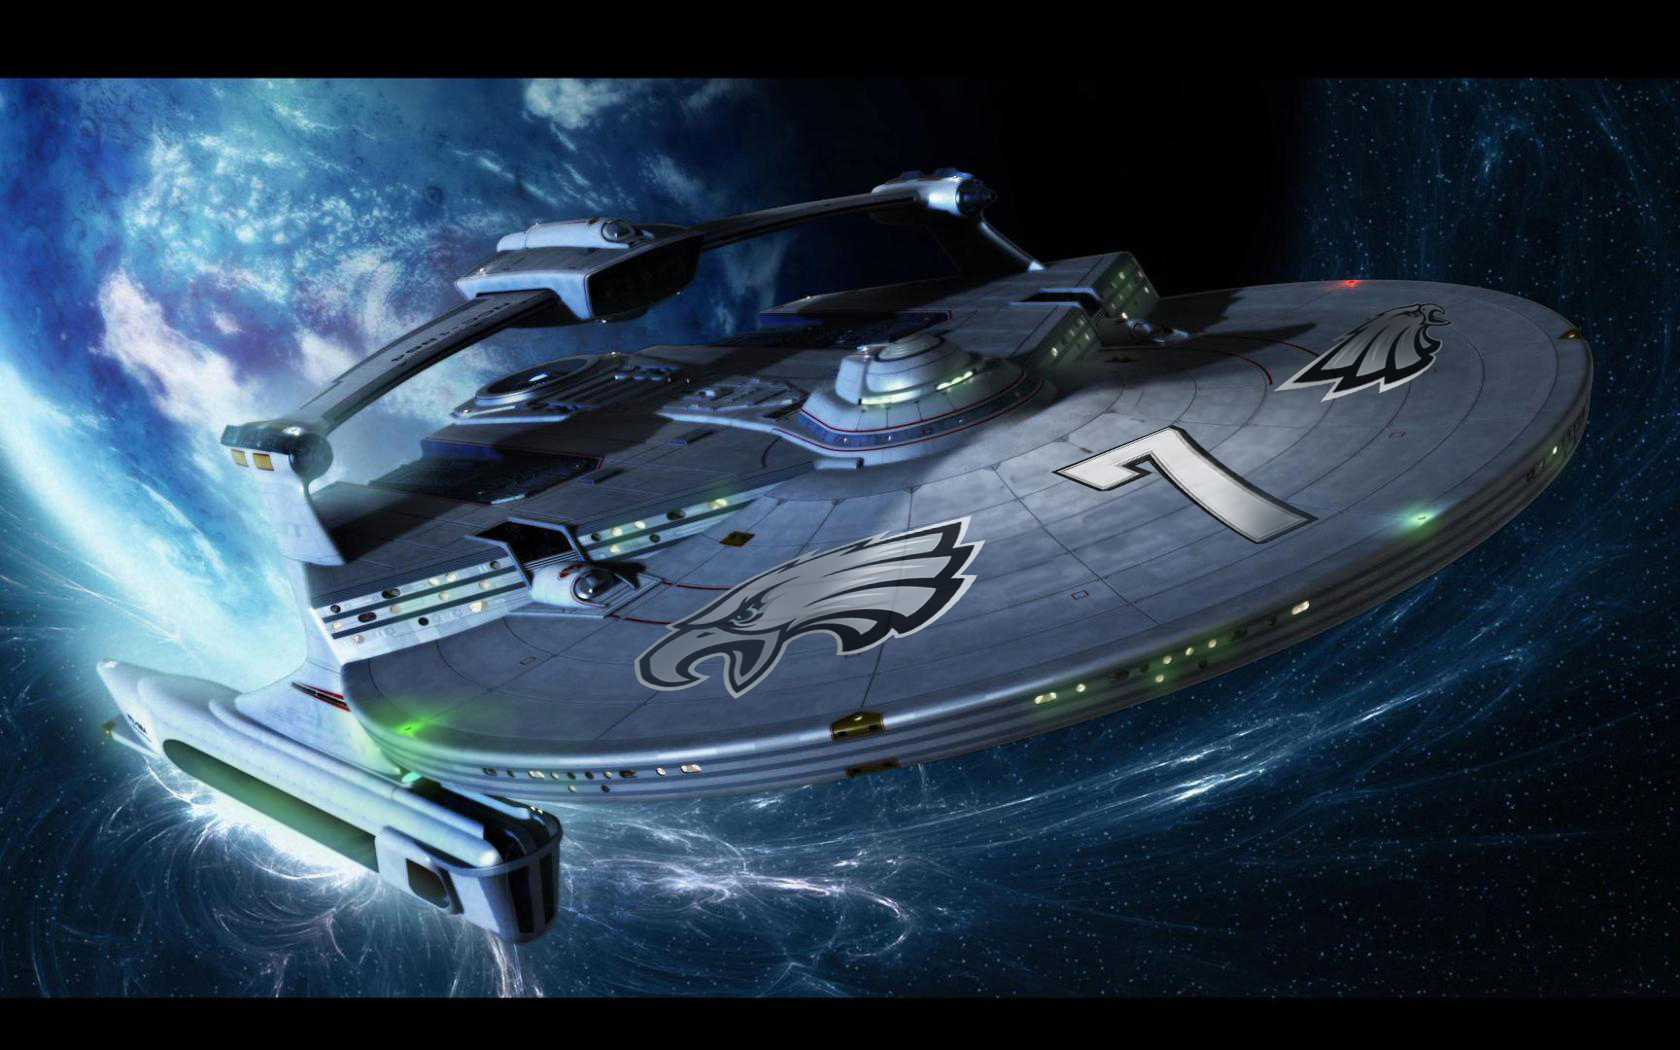 Michael Vick Starship Image Created By Eagles Fan Mike Cessario